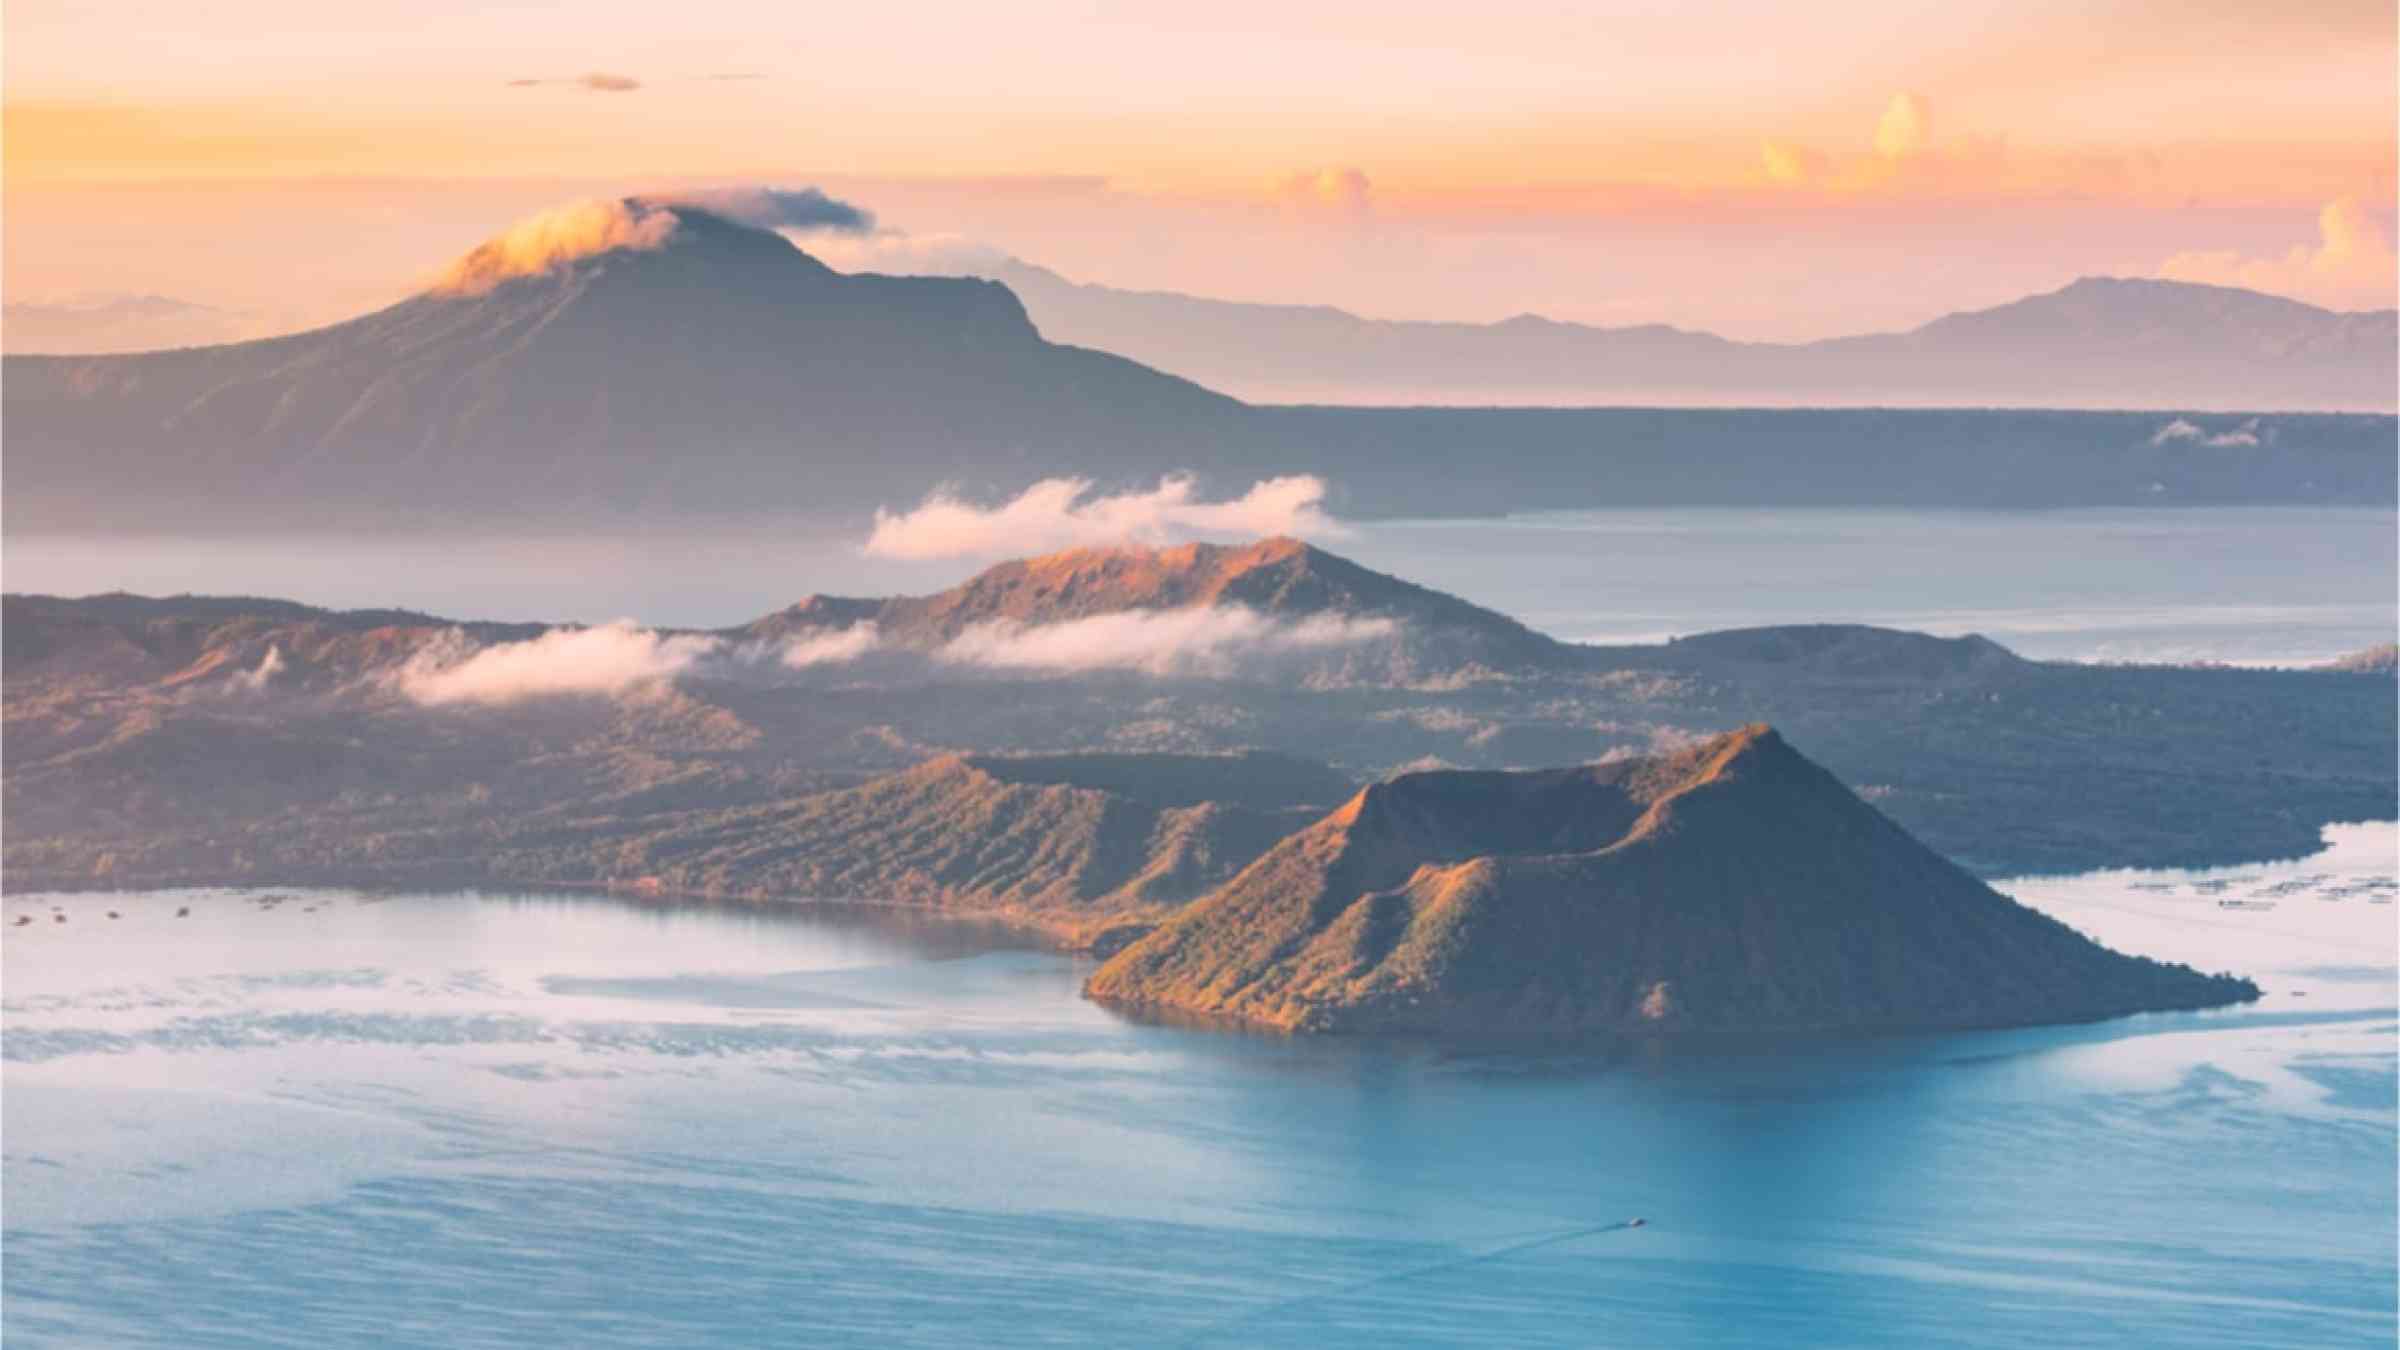 Taal Volcano on the Philippines during sunset.